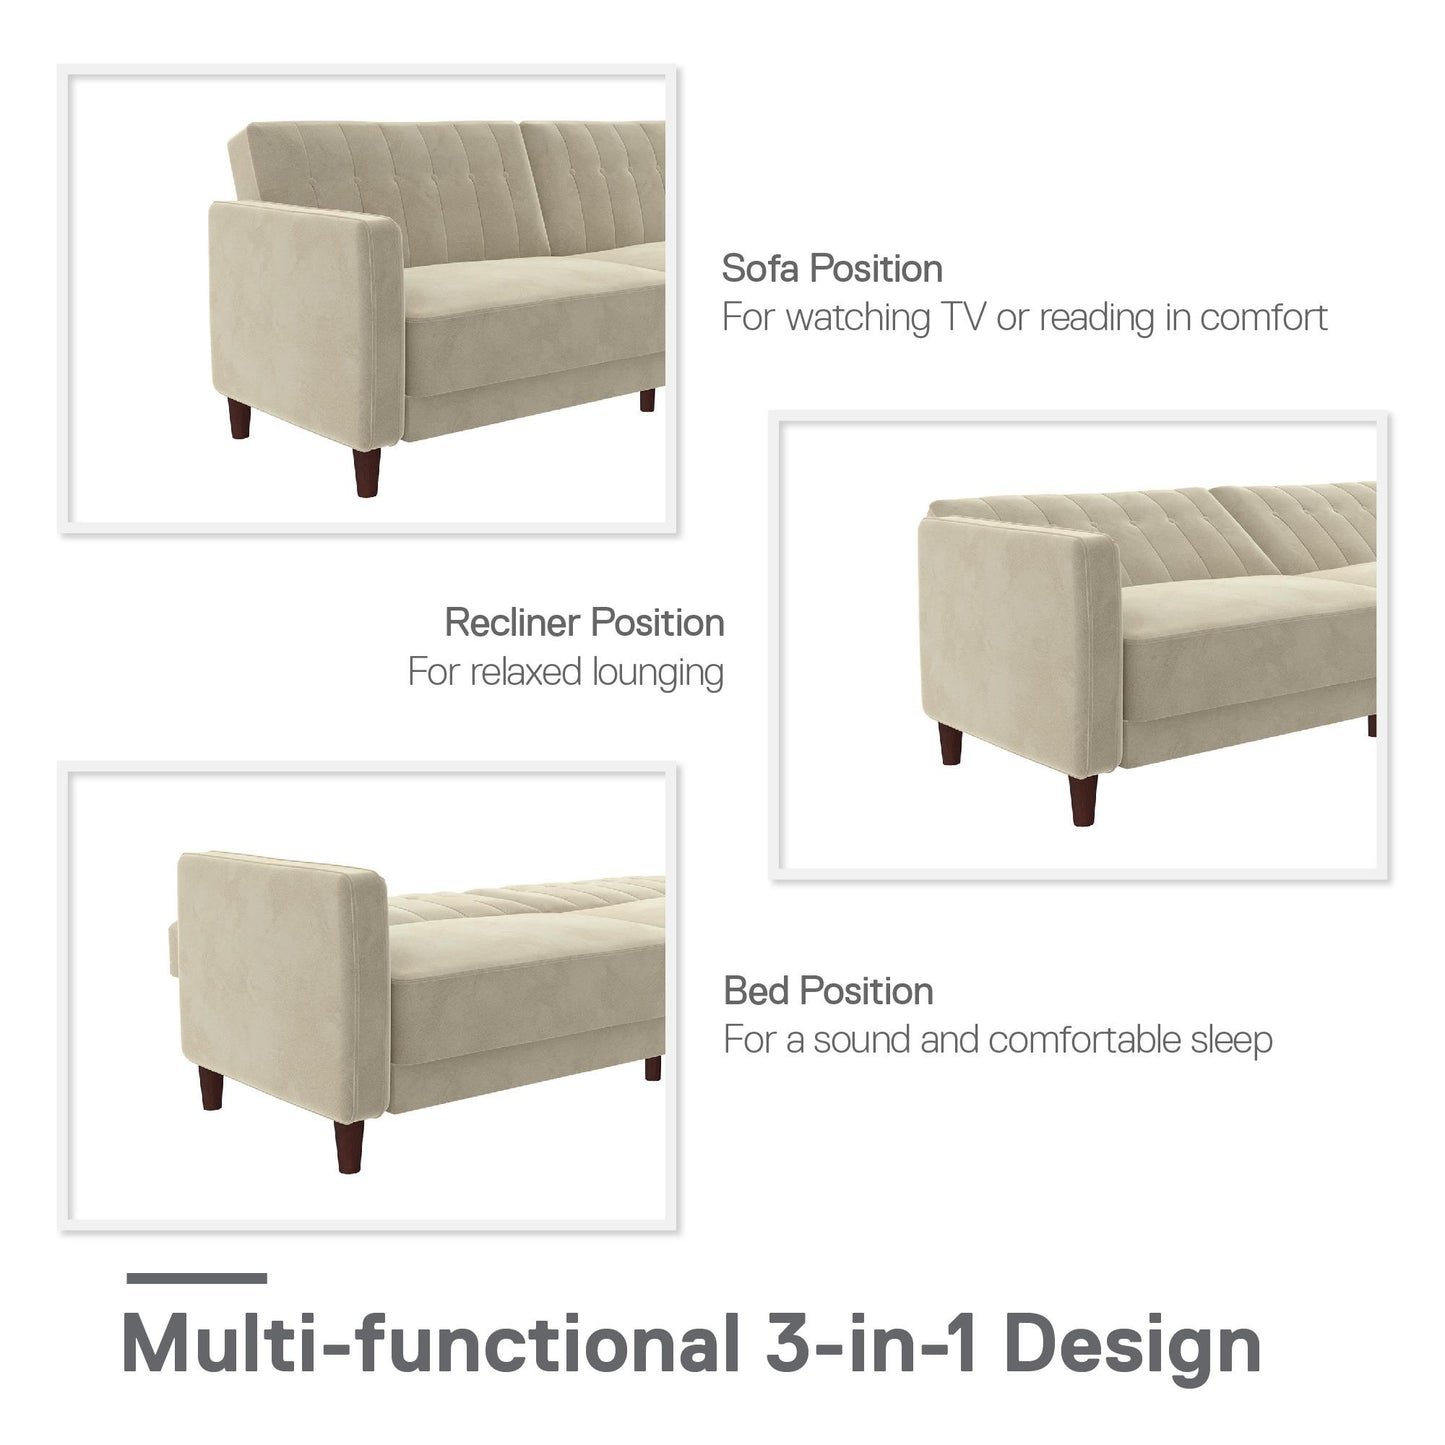 Pin Tufted Transitional Futon with Vertical Stitching and Button Tufting - Tan Velvet